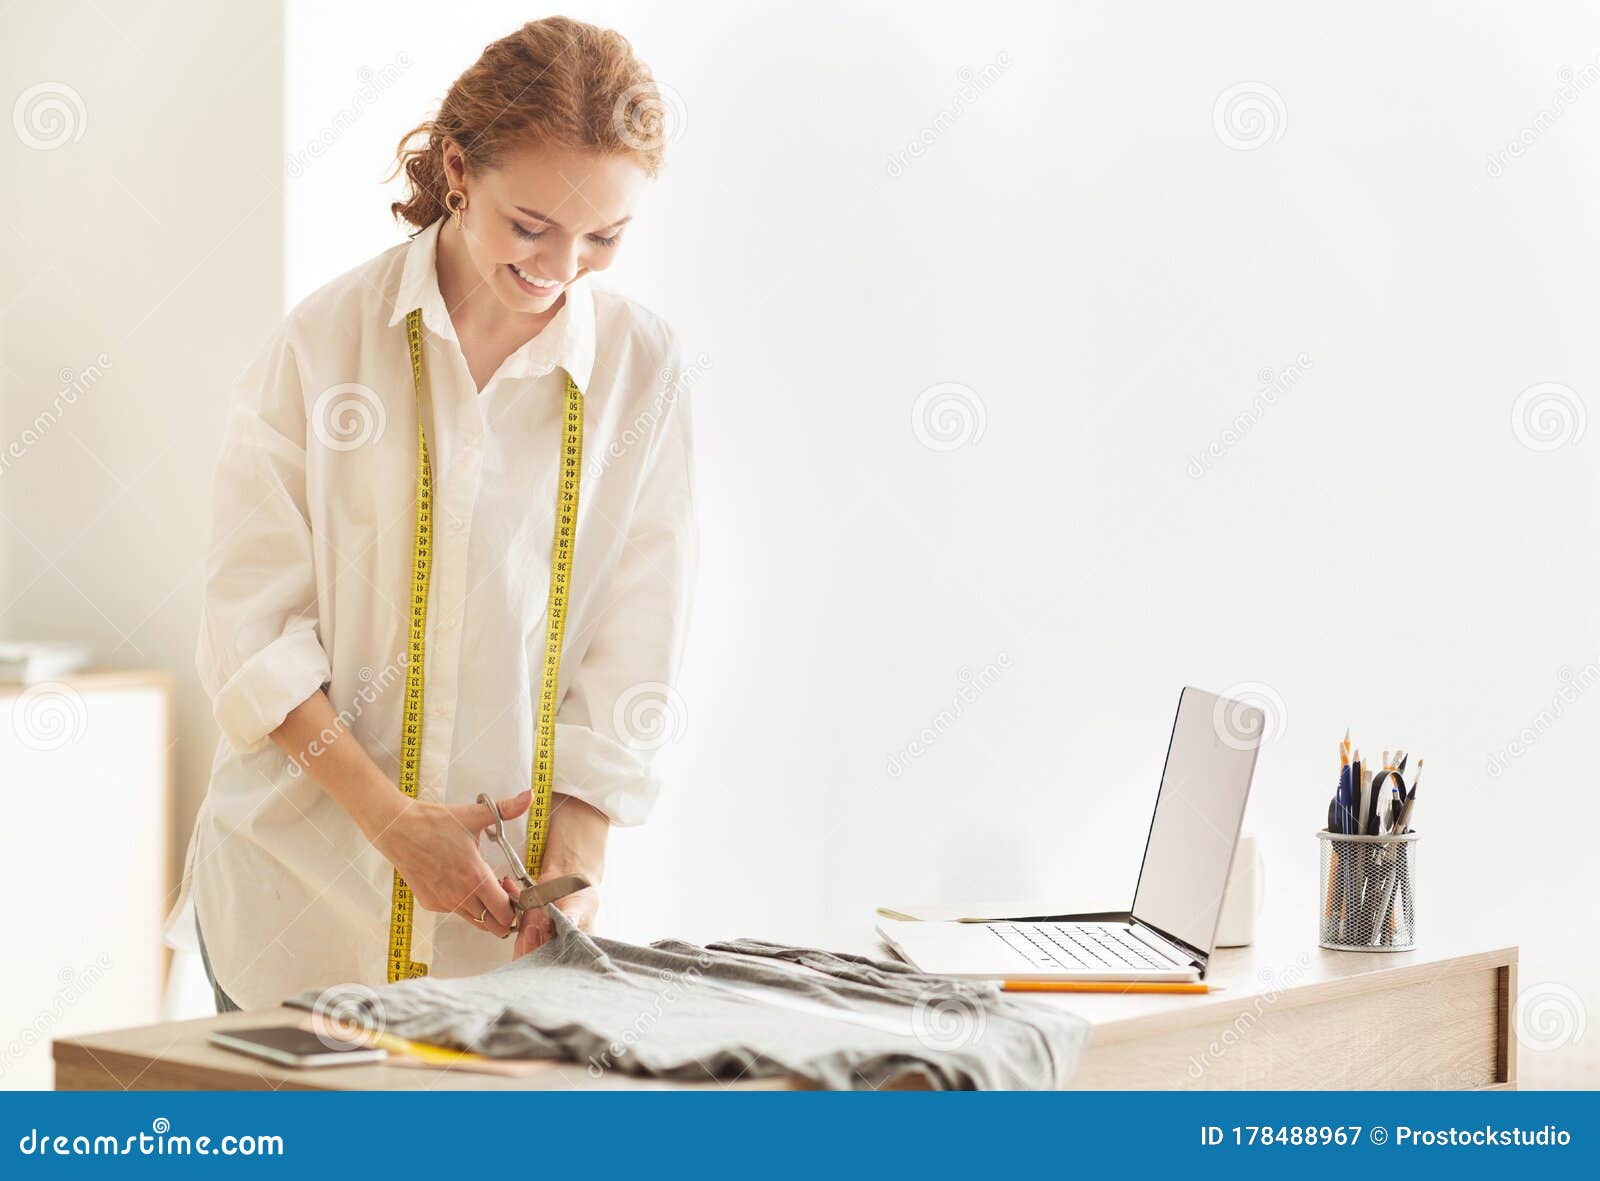 Female Tailor Cutting Fabric with Scissors, Sewing Costume Stock Image ...